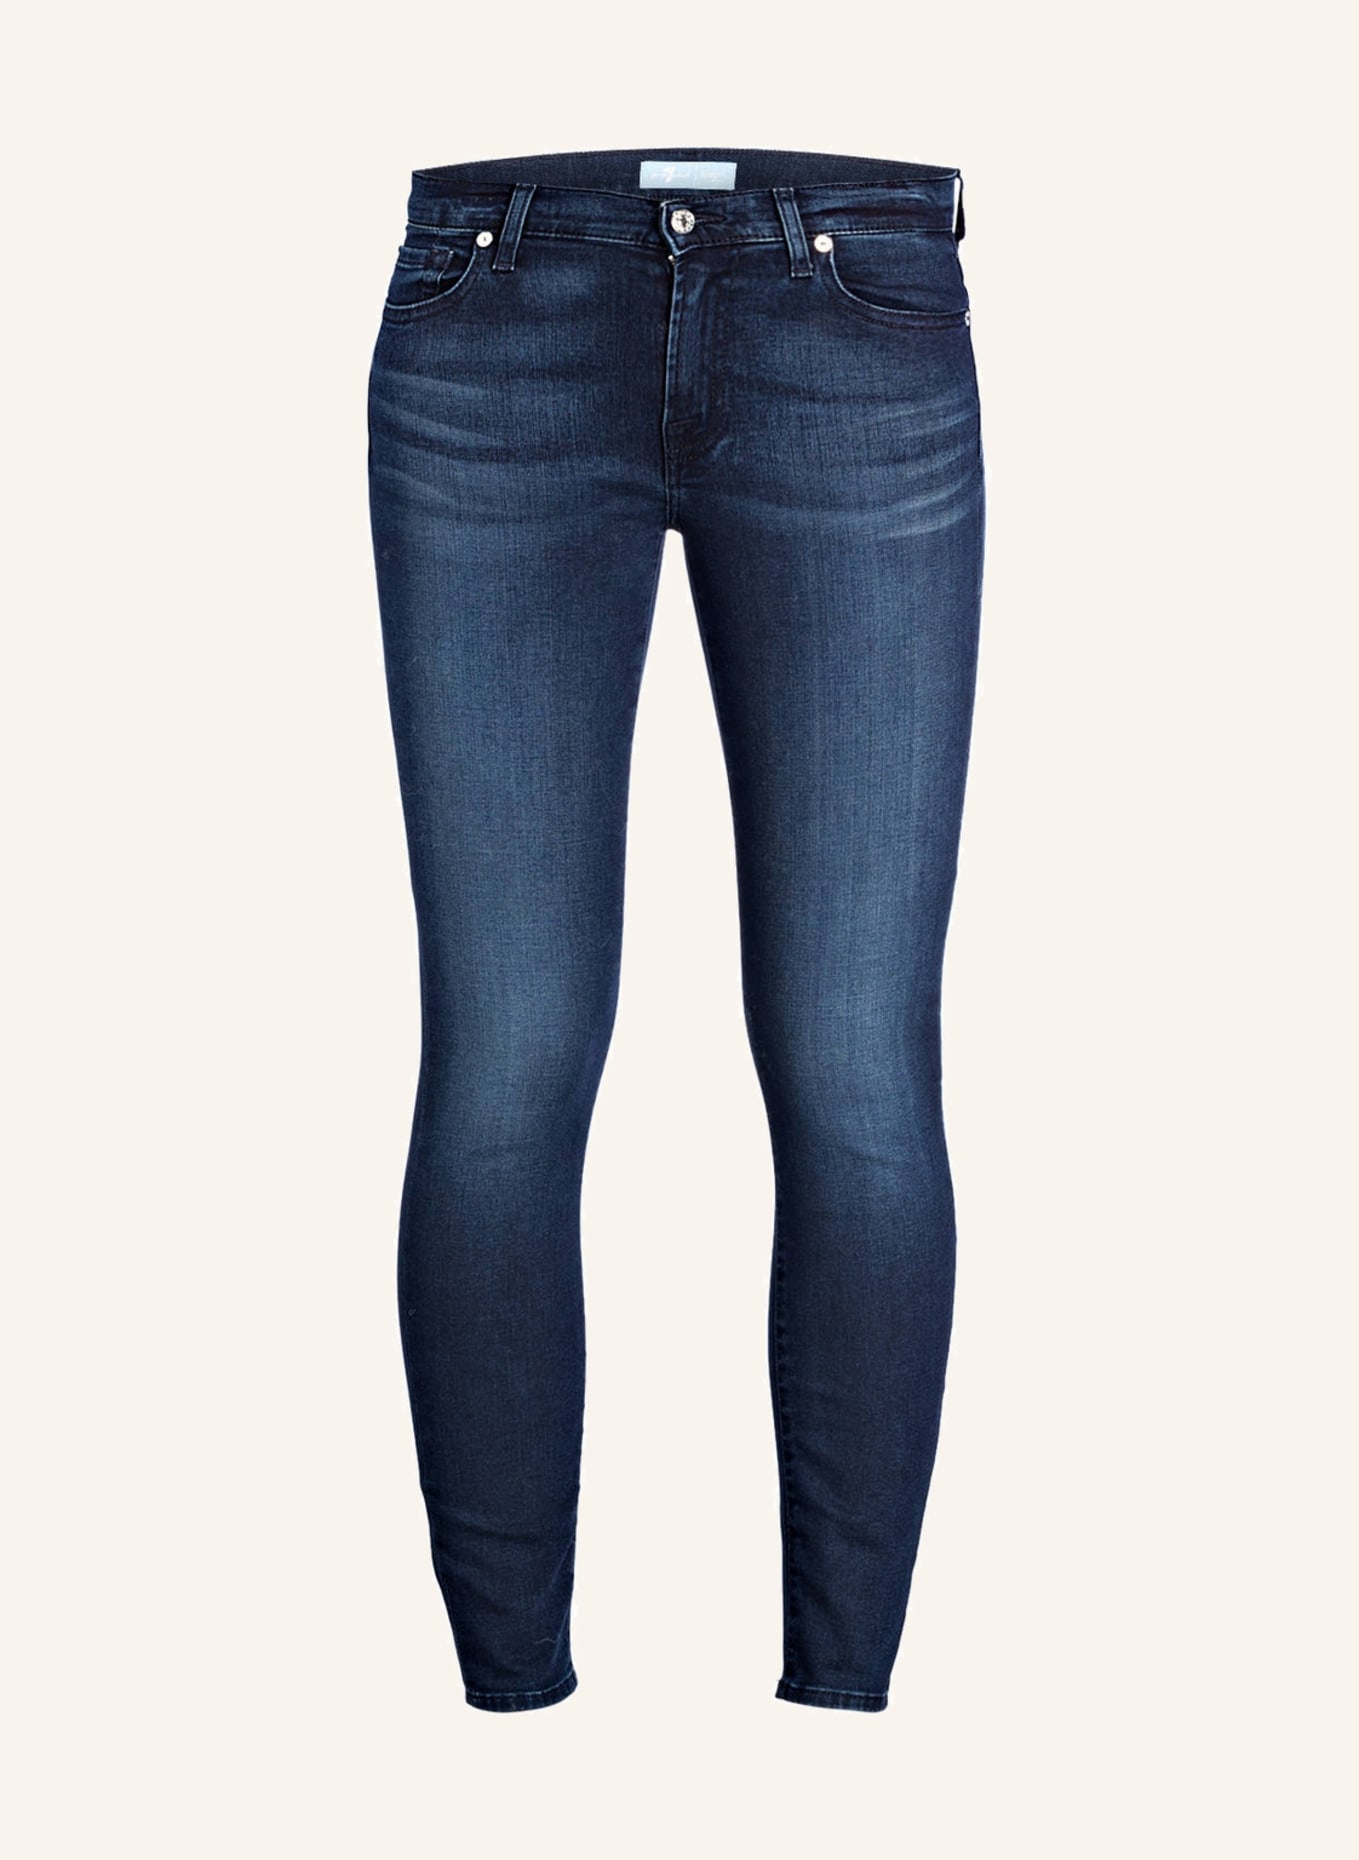 7 for all mankind Cropped-Jeans THE SKINNY CROP, Farbe: UF BAIR PARK AVENUE DARKBLUE (Bild 1)